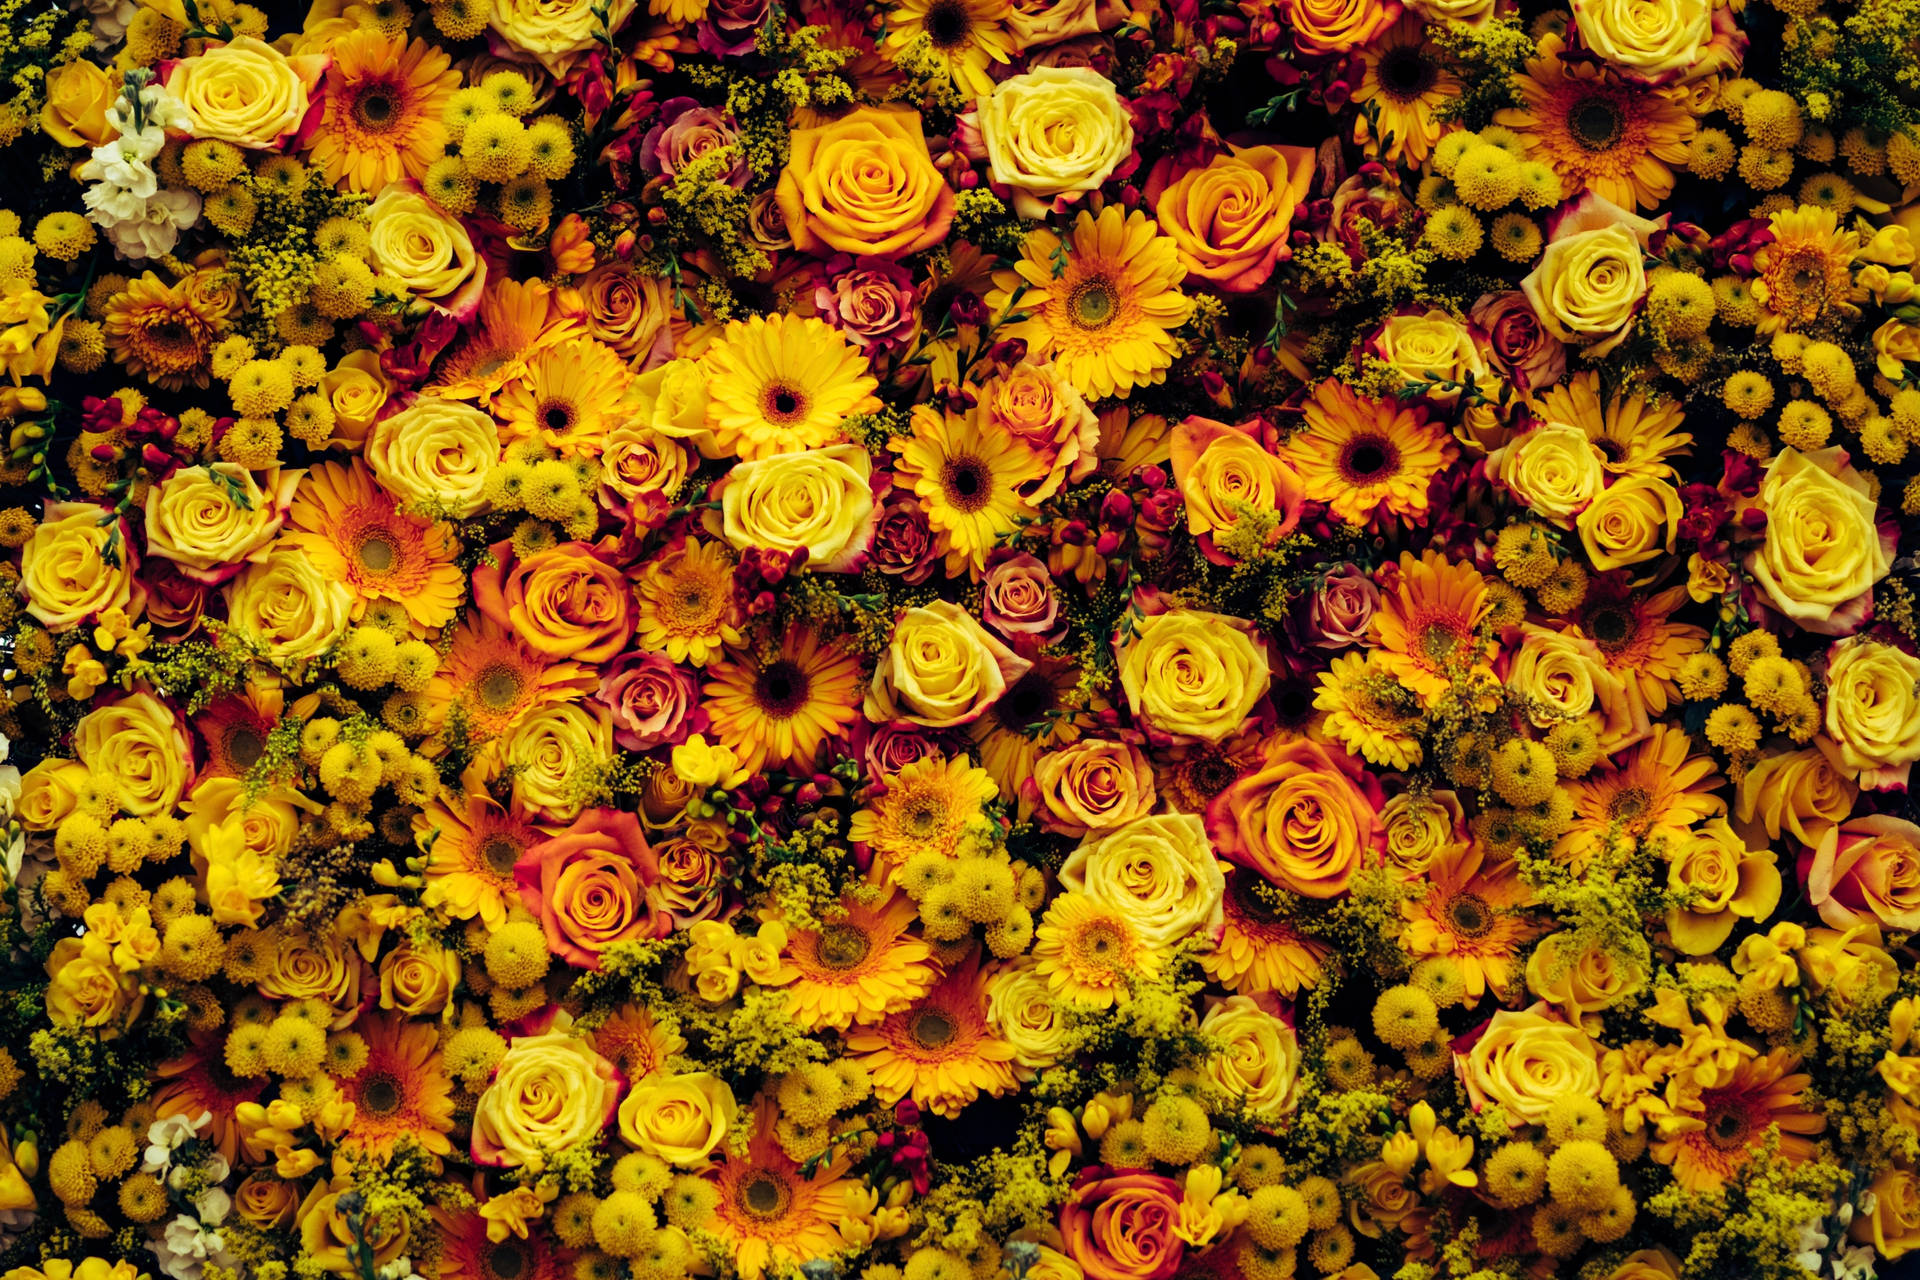 Floral 4361X2907 Wallpaper and Background Image